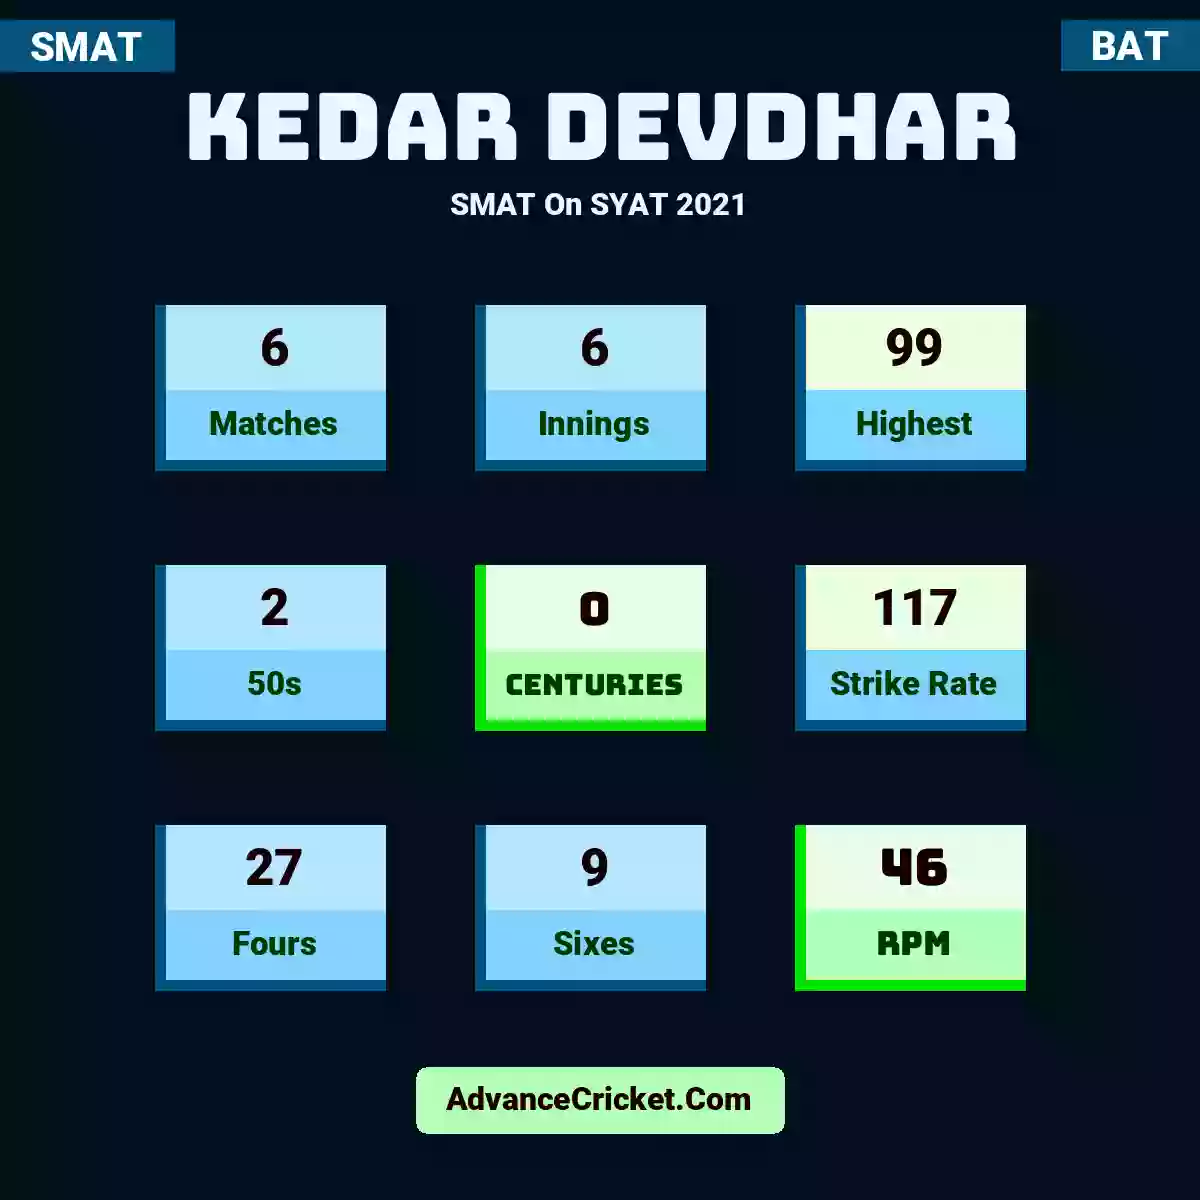 Kedar Devdhar SMAT  On SYAT 2021, Kedar Devdhar played 6 matches, scored 99 runs as highest, 2 half-centuries, and 0 centuries, with a strike rate of 117. K.Devdhar hit 27 fours and 9 sixes, with an RPM of 46.